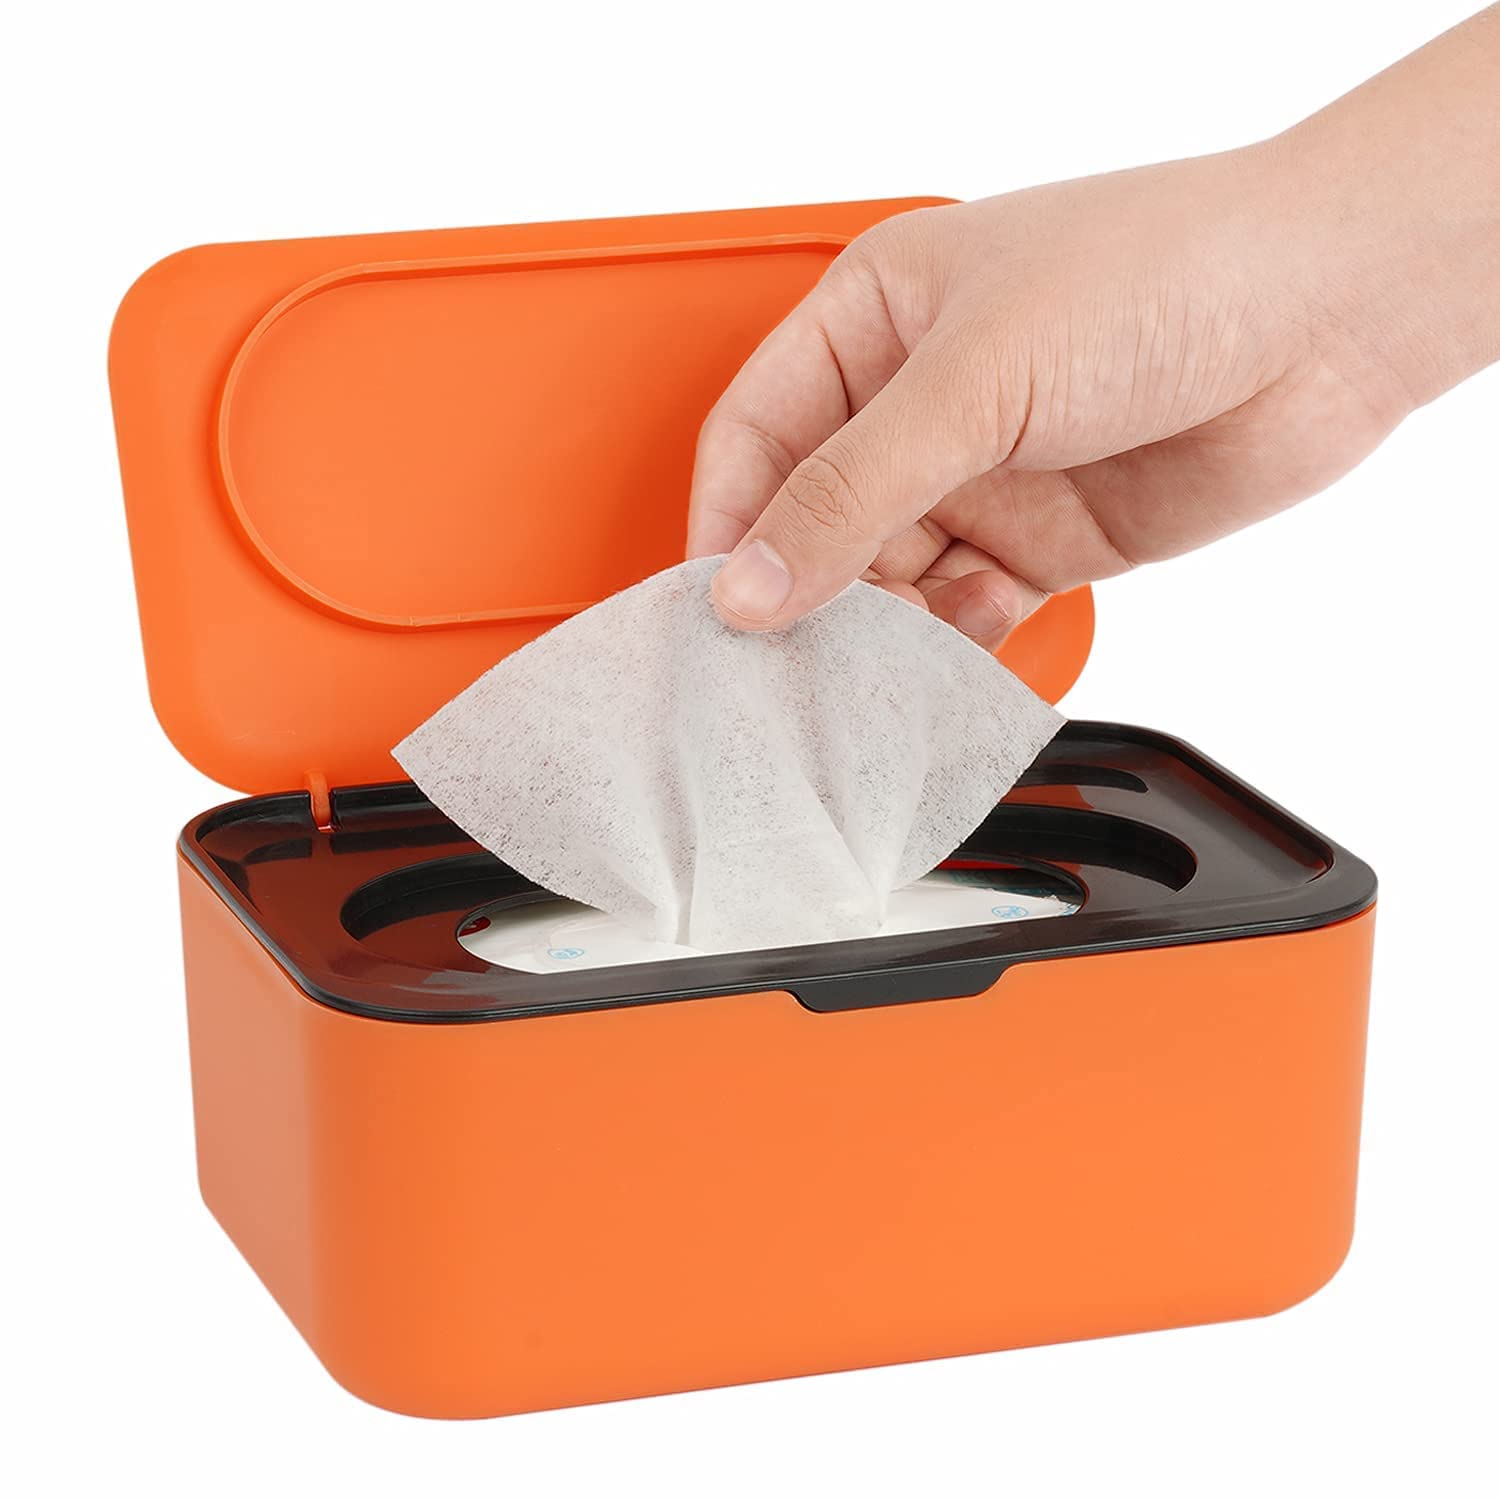 Seposeve Wipes Dispenser, Wipe Holder for Baby & Adult, Seposeve Refillable Wipe container, Keeps Wipes Fresh, One-Handed Operati